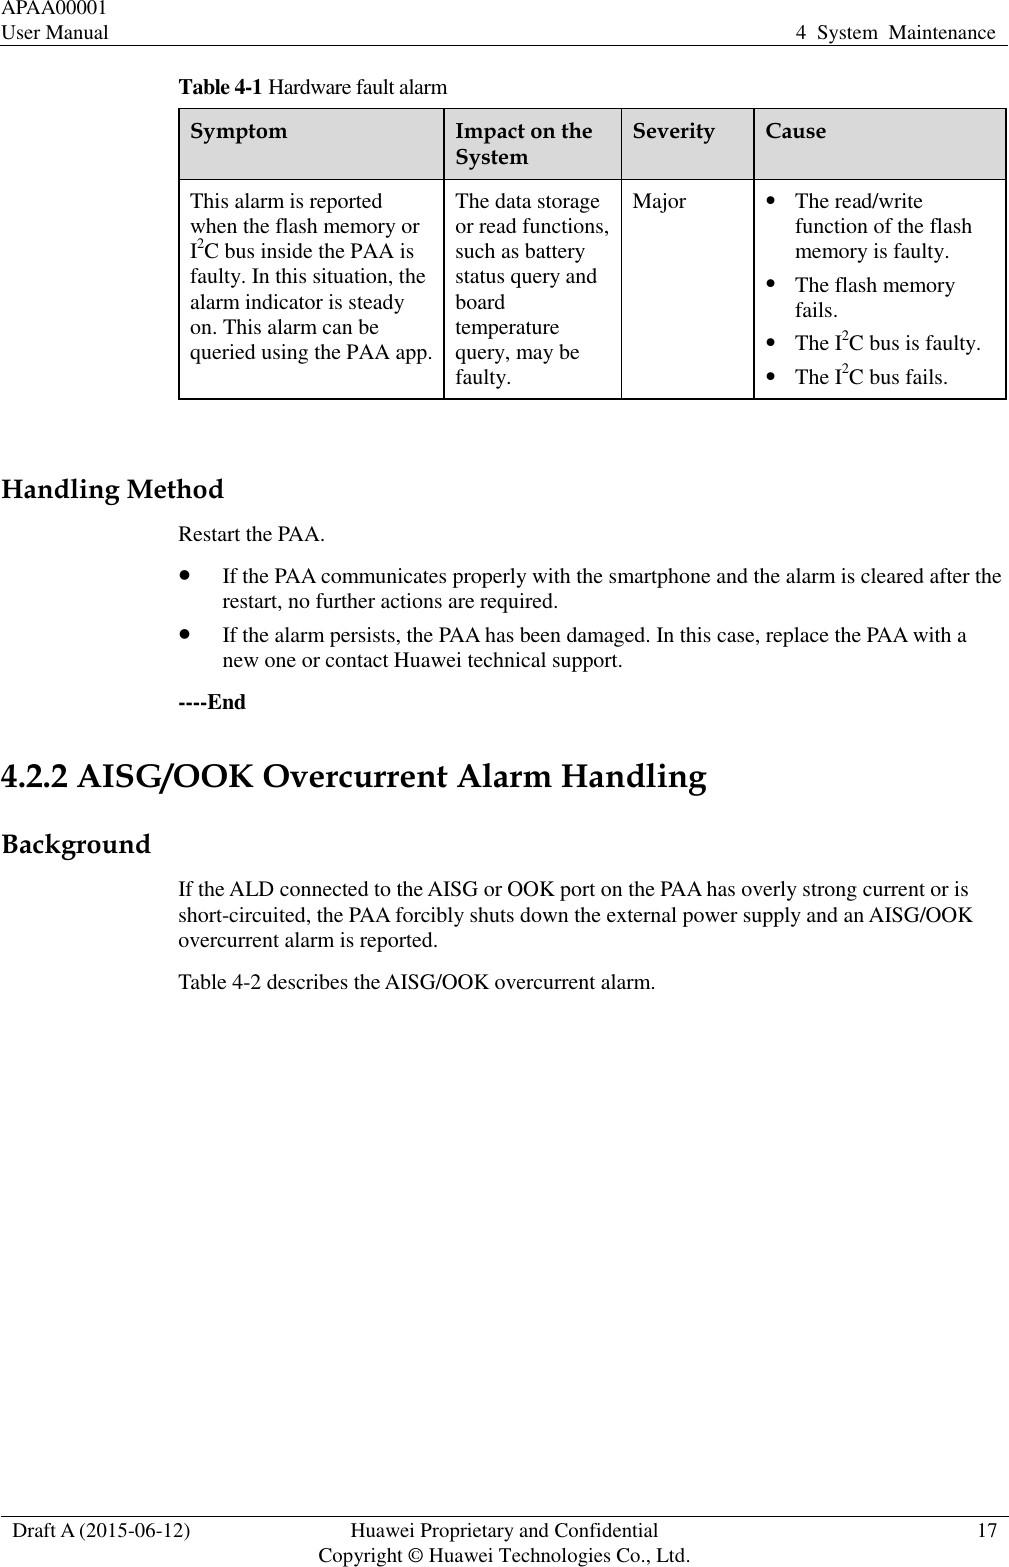 APAA00001 User Manual 4  System  Maintenance  Draft A (2015-06-12) Huawei Proprietary and Confidential           Copyright © Huawei Technologies Co., Ltd. 17  Table 4-1 Hardware fault alarm Symptom Impact on the System Severity Cause This alarm is reported when the flash memory or I2C bus inside the PAA is faulty. In this situation, the alarm indicator is steady on. This alarm can be queried using the PAA app.   The data storage or read functions, such as battery status query and board temperature query, may be faulty.   Major  The read/write function of the flash memory is faulty.  The flash memory fails.  The I2C bus is faulty.    The I2C bus fails.  Handling Method Restart the PAA.  If the PAA communicates properly with the smartphone and the alarm is cleared after the restart, no further actions are required.    If the alarm persists, the PAA has been damaged. In this case, replace the PAA with a new one or contact Huawei technical support.   ----End 4.2.2 AISG/OOK Overcurrent Alarm Handling Background If the ALD connected to the AISG or OOK port on the PAA has overly strong current or is short-circuited, the PAA forcibly shuts down the external power supply and an AISG/OOK overcurrent alarm is reported.   Table 4-2 describes the AISG/OOK overcurrent alarm.   